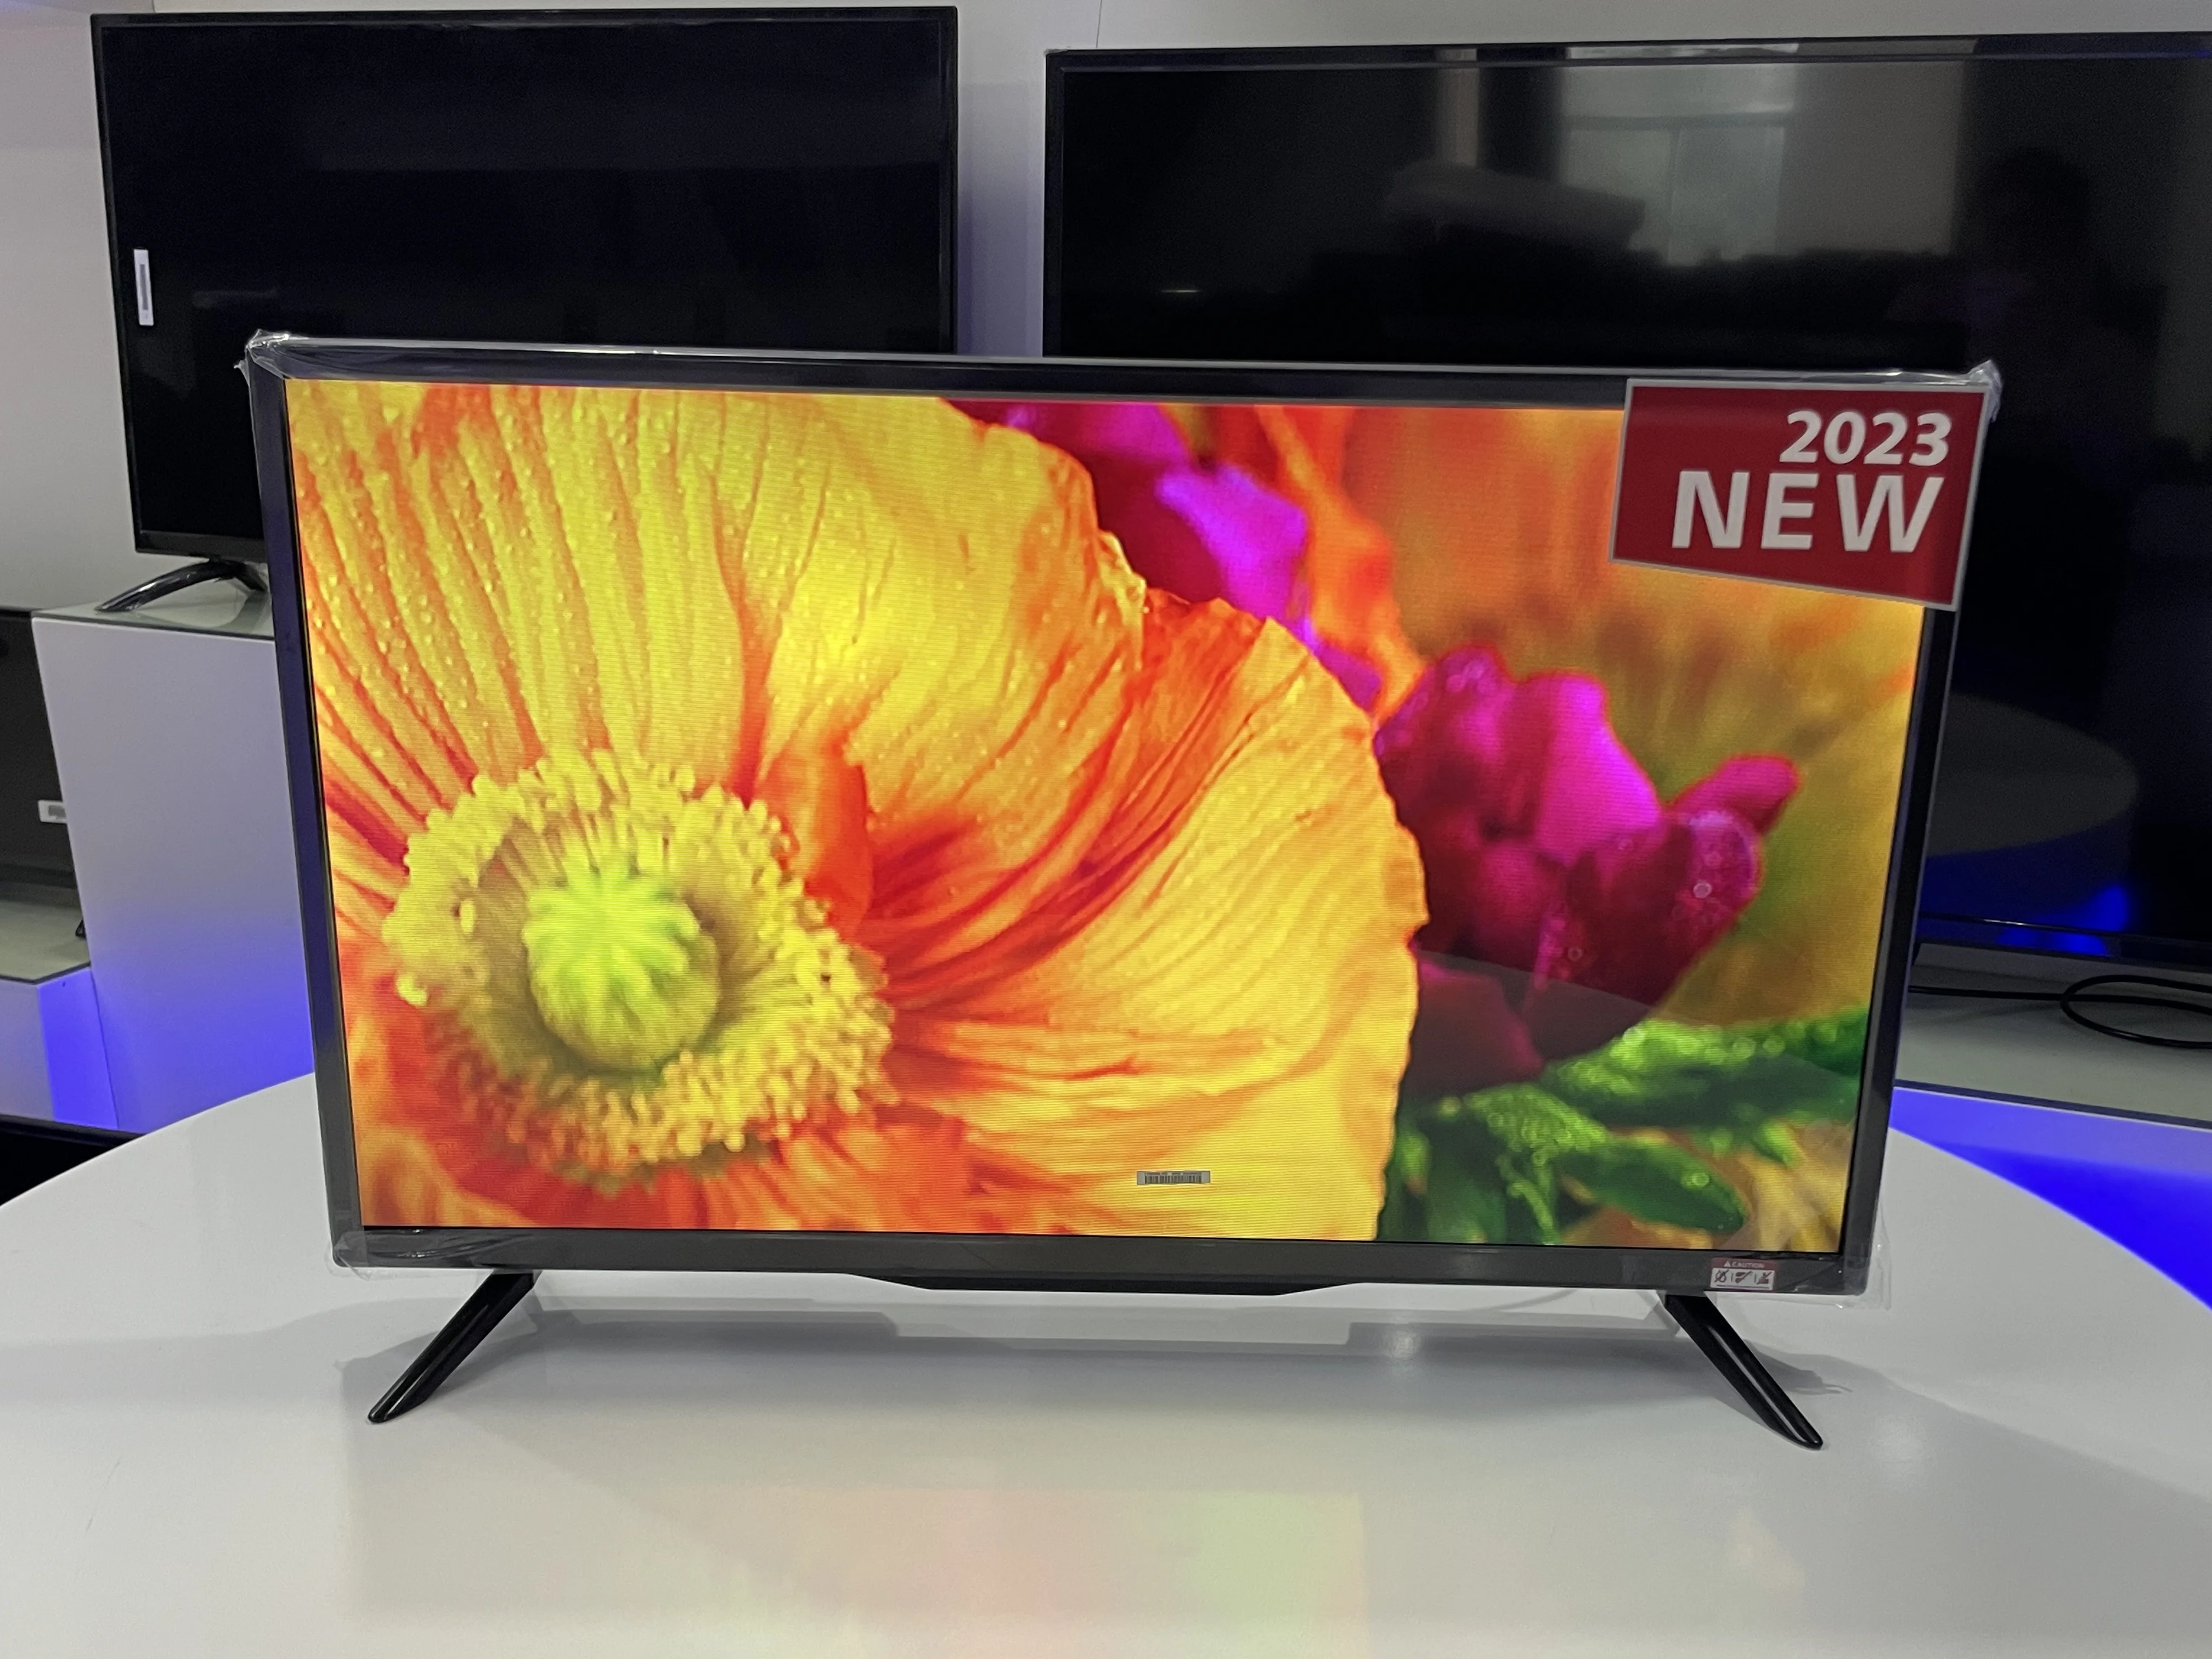 Led Tv 32 Inch China Trade,Buy China Direct From Led Tv 32 Inch Factories  at